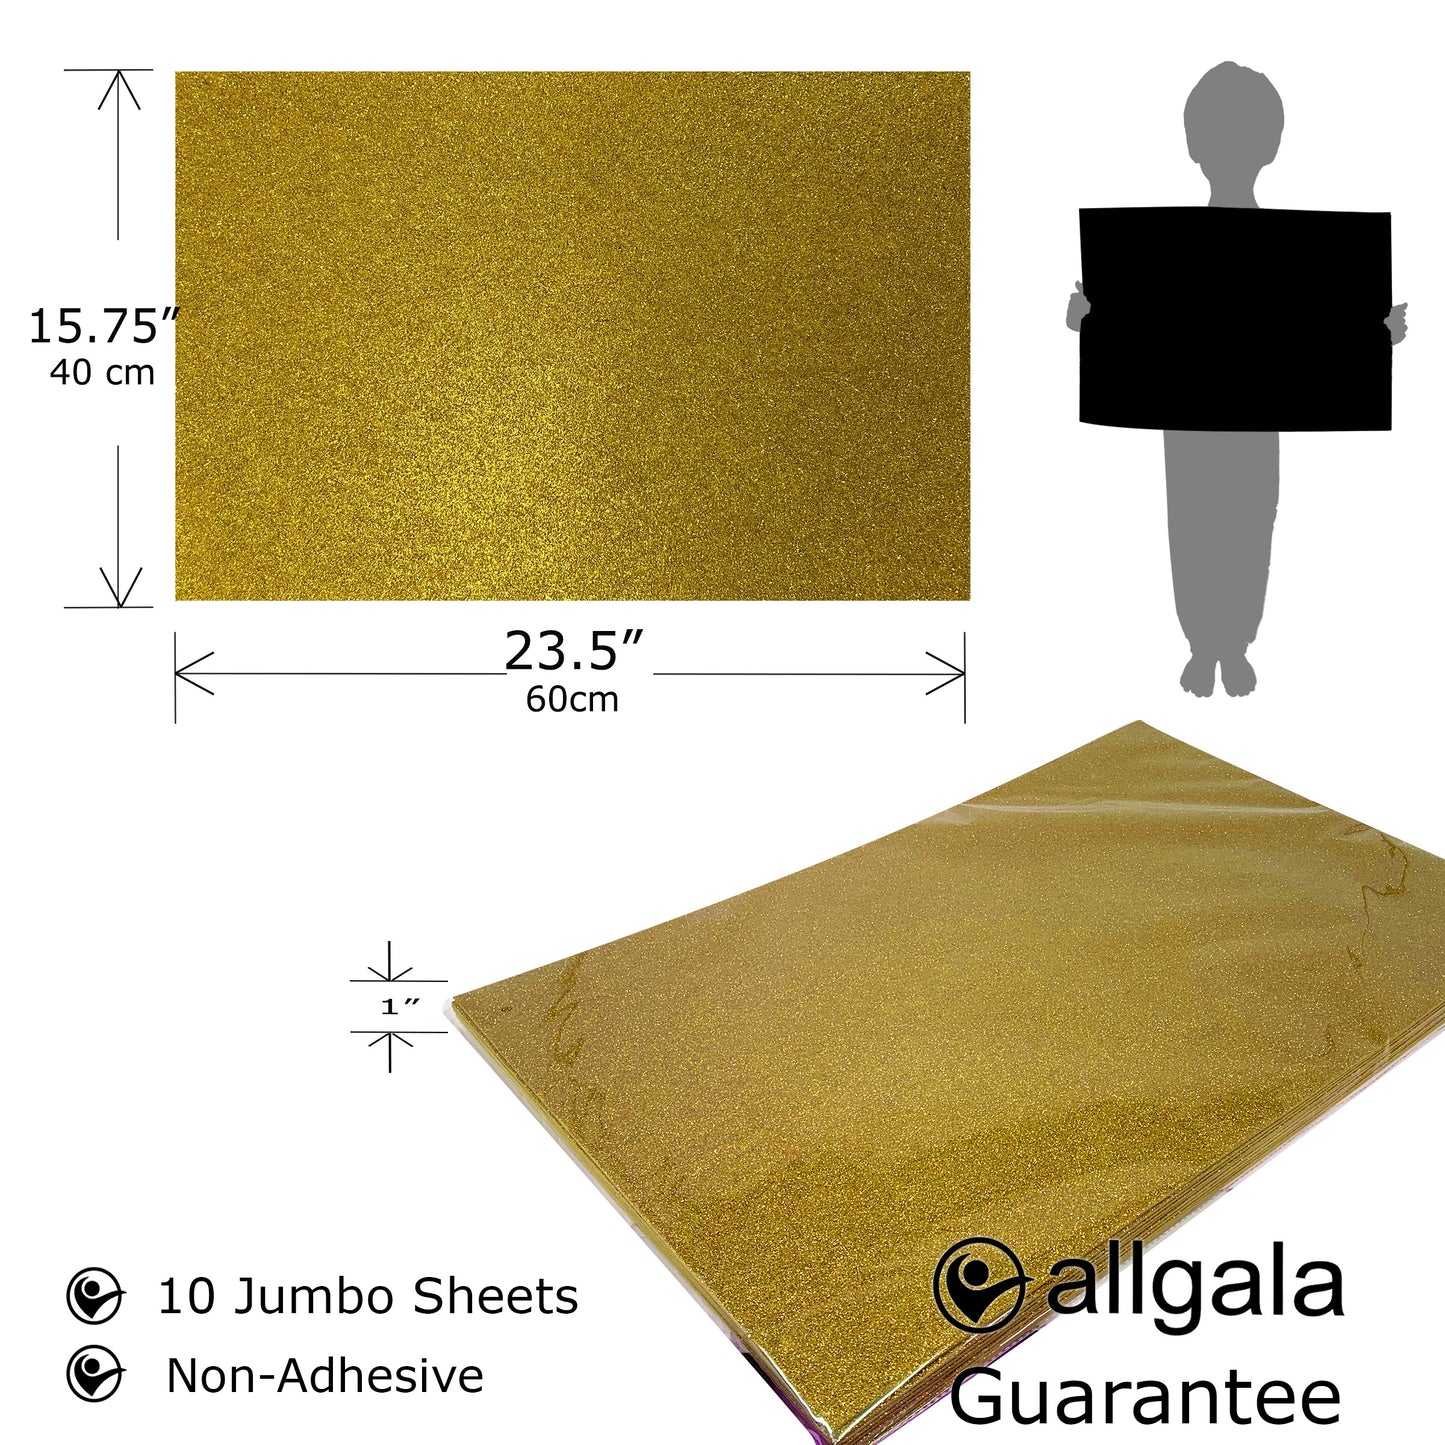 Allgala 12 Pack Glitter Eva Foam Paper 8 x 12 Sheets - Assorted Colors - Perfect for Kids Art Projects and Classrooms or Cosplay